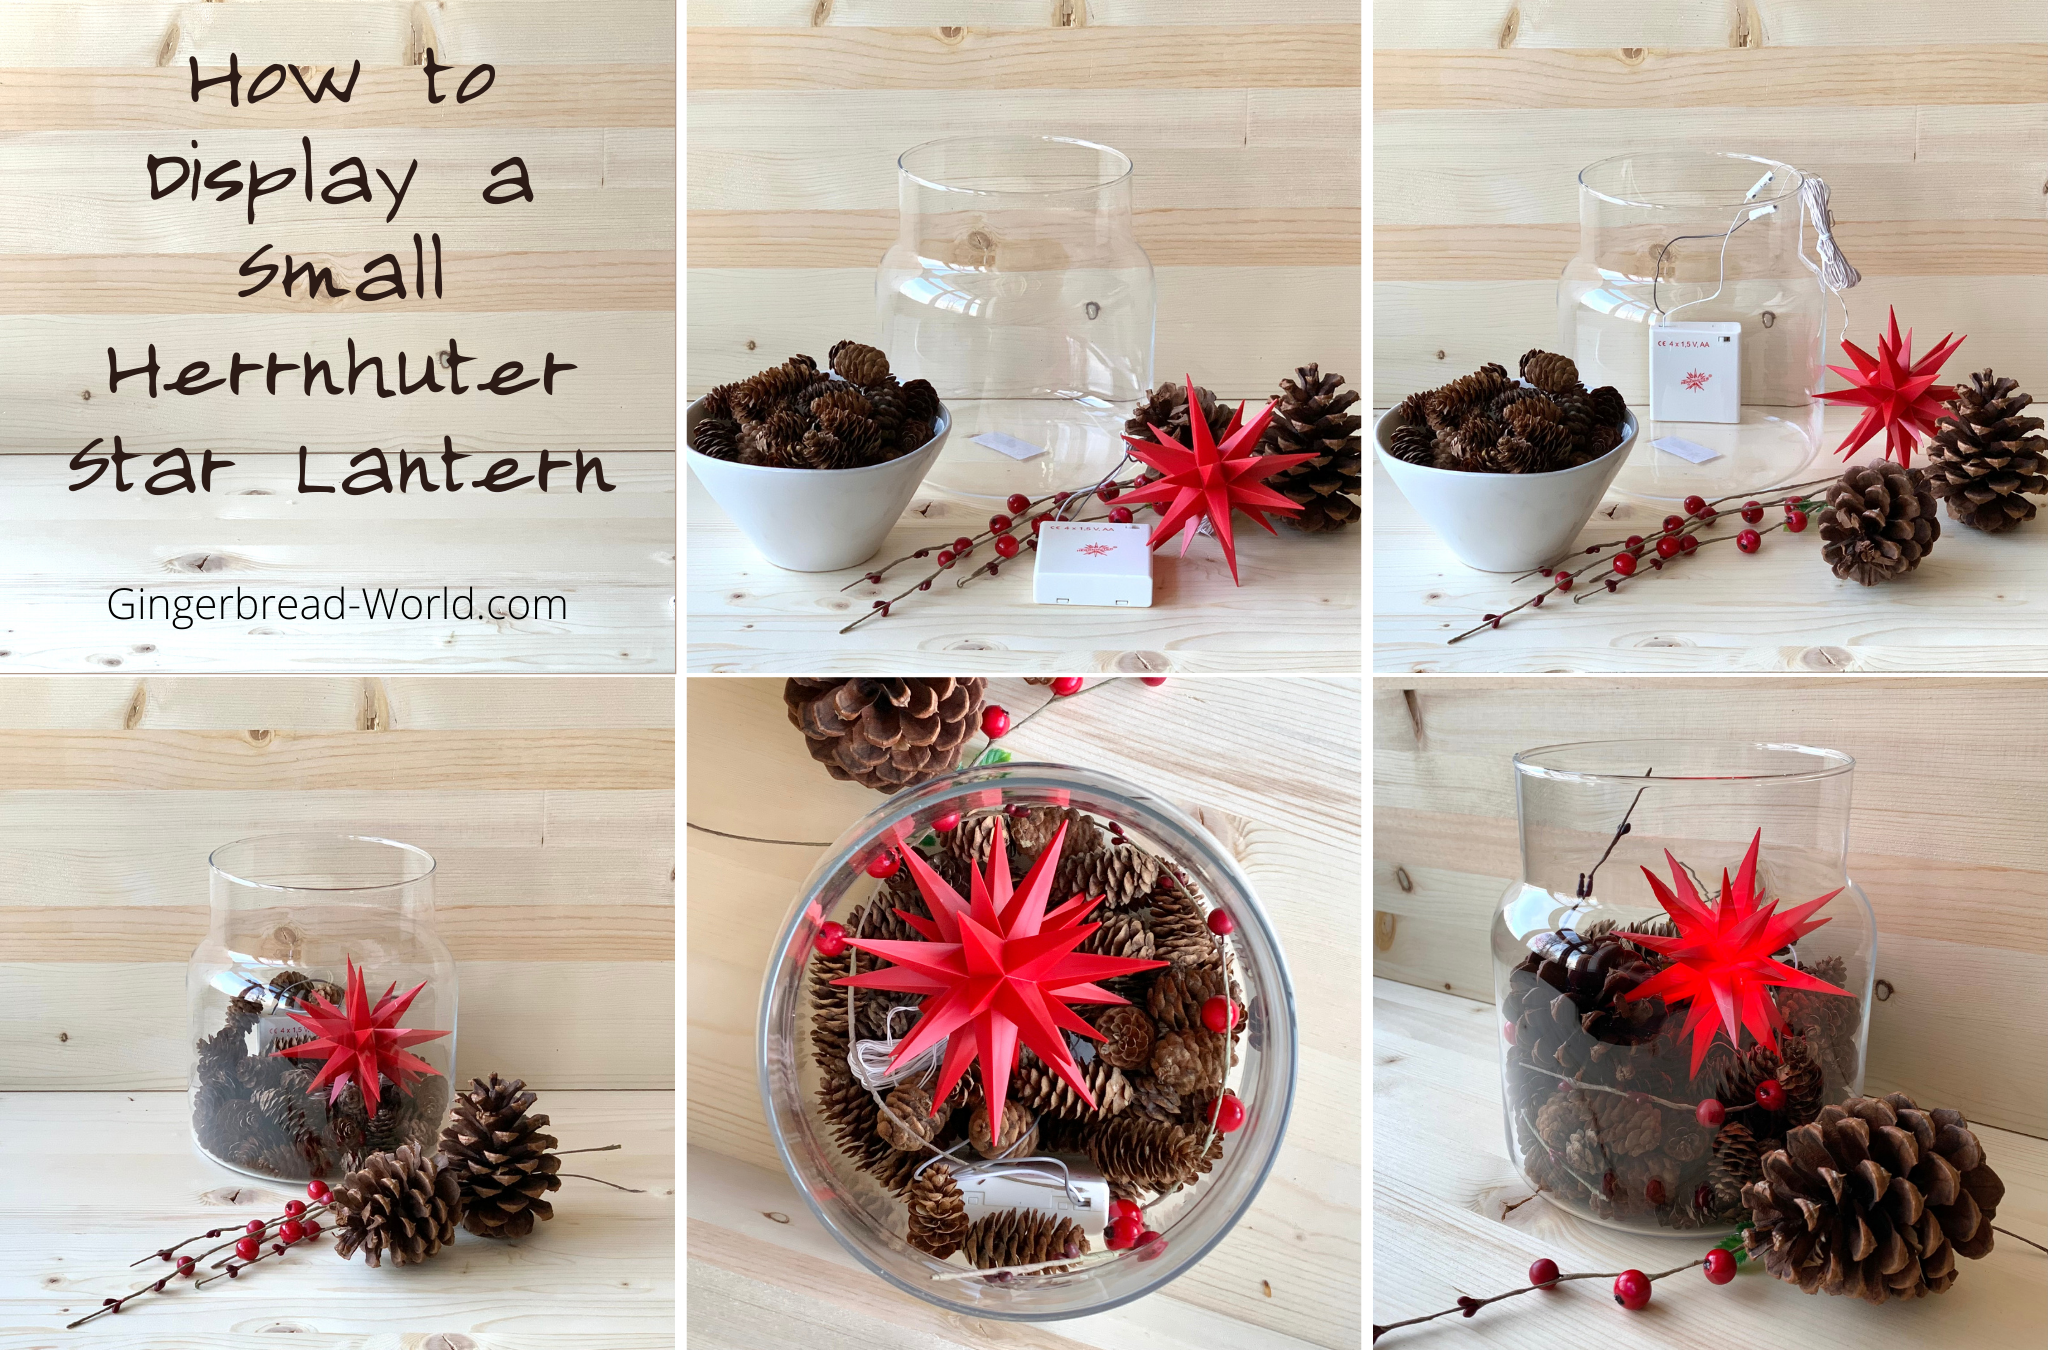 European Ware Haus Blog - How to Display a Small Herrnhuter Star Lantern - Step by Step